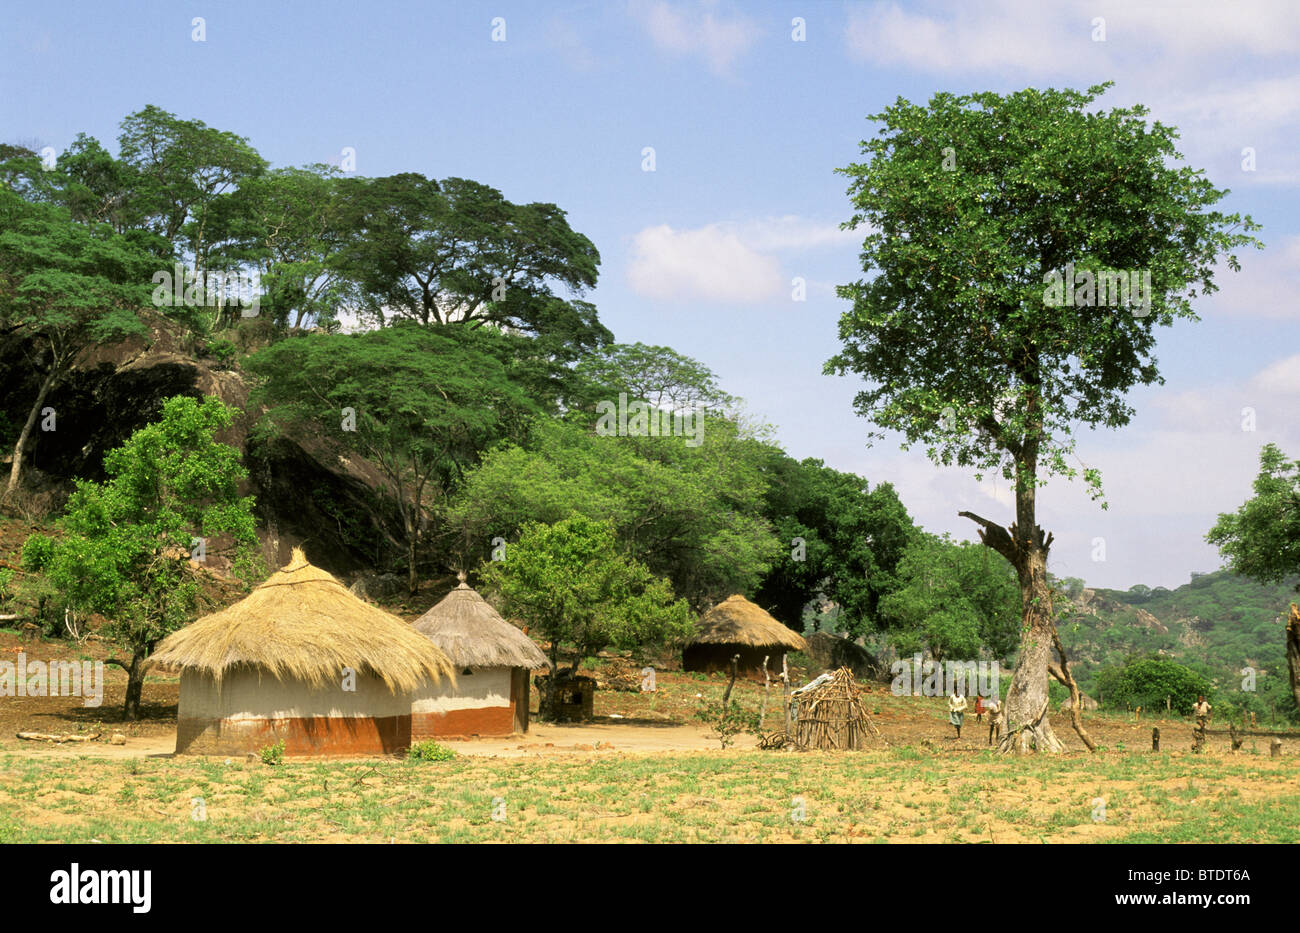 Scenic rural landscape with traditional thatched mud huts Stock Photo